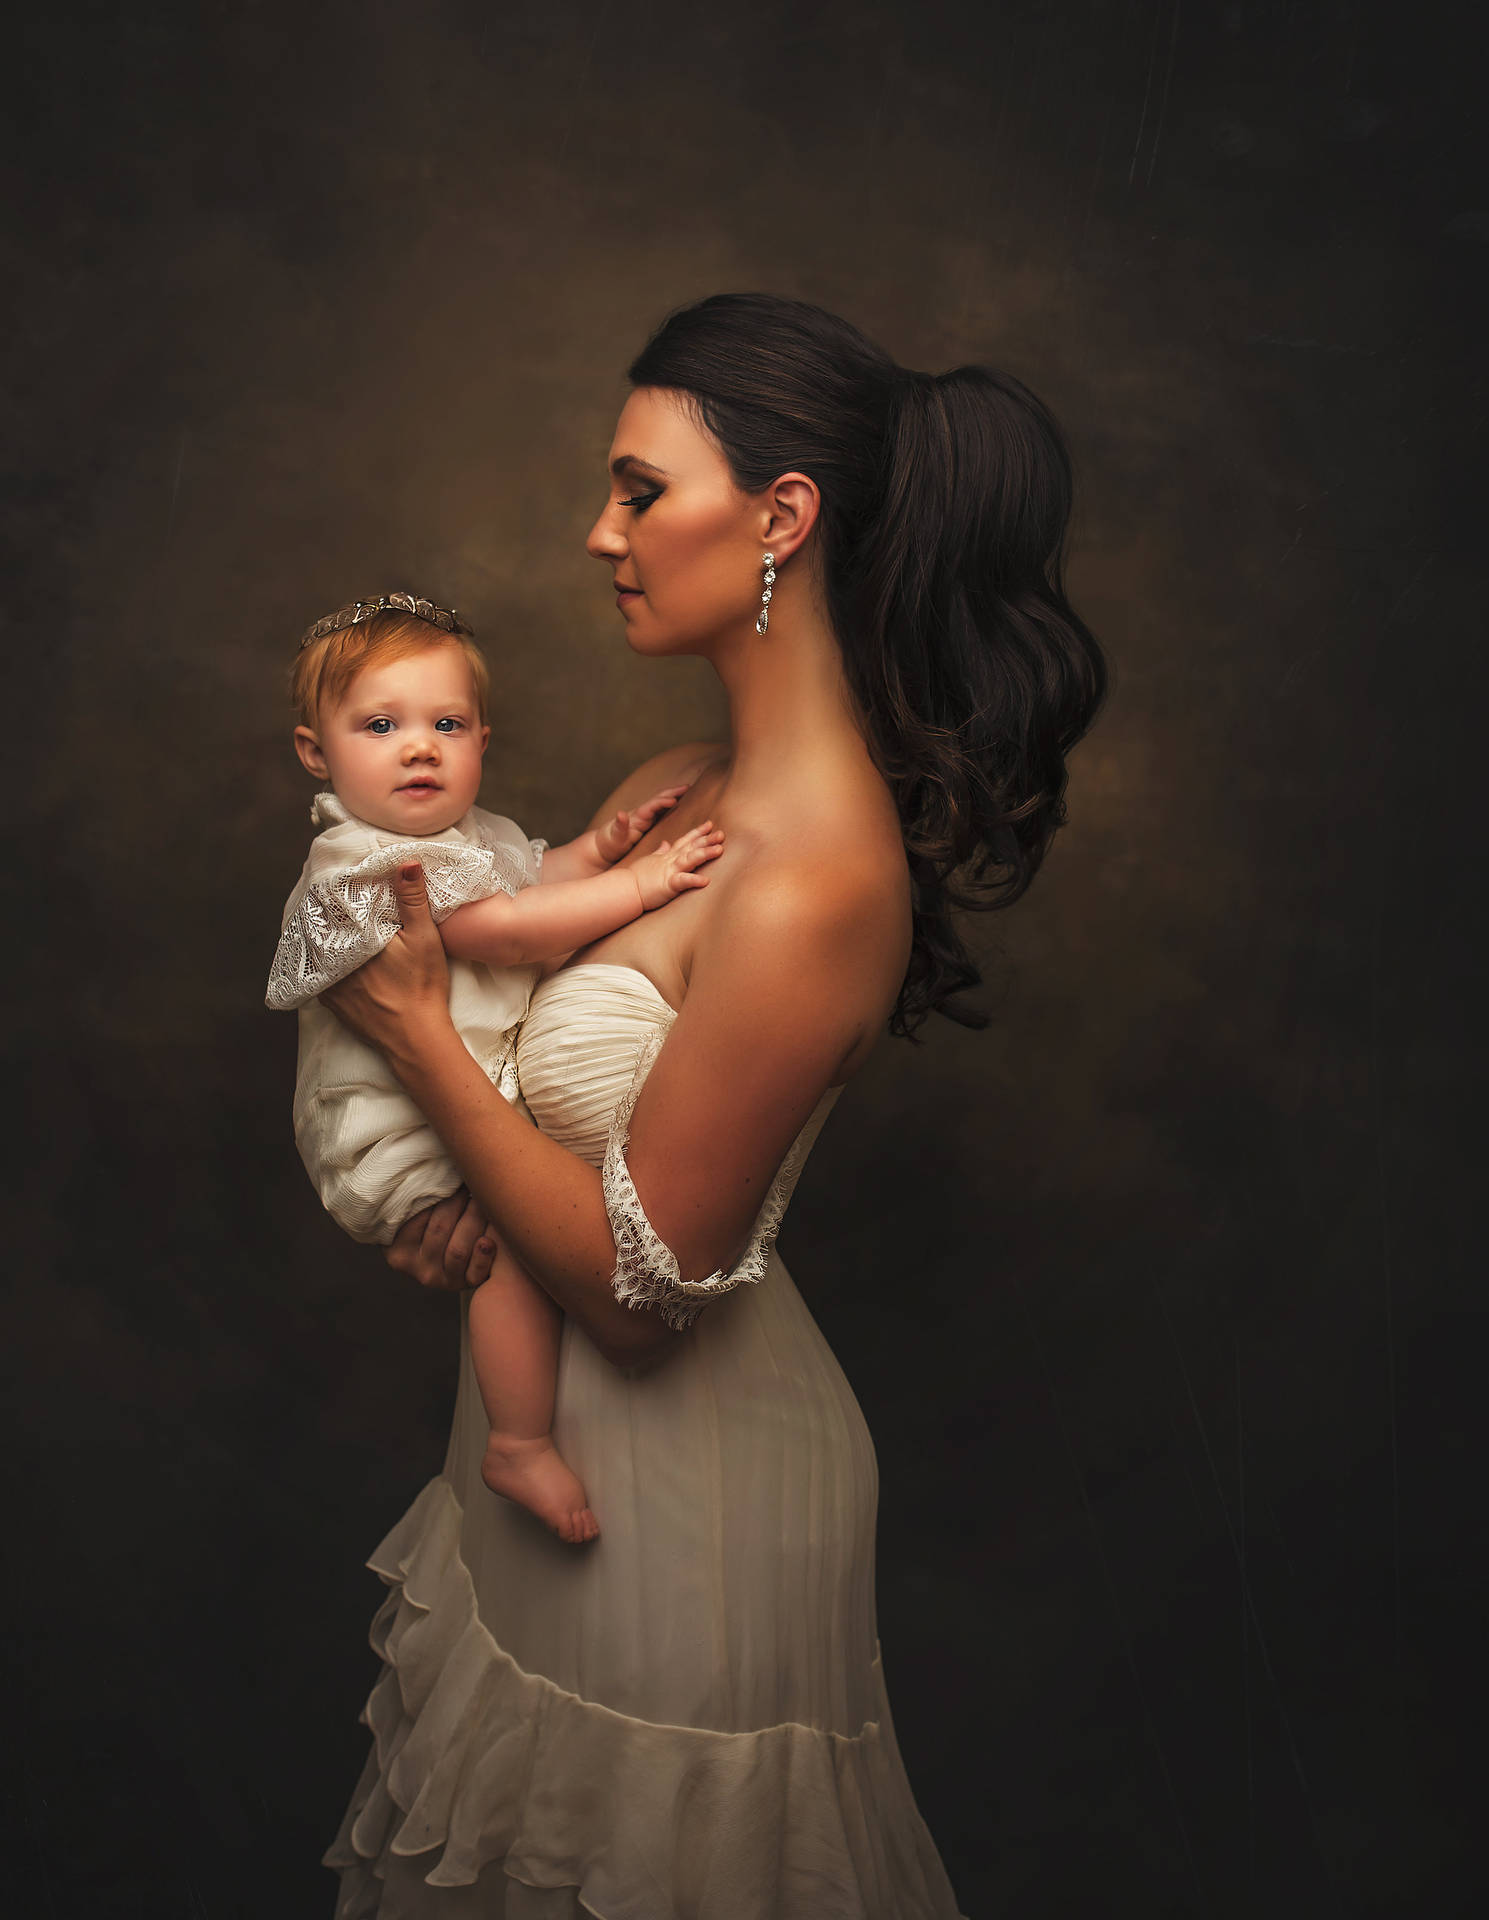 Caption: A precious moment between Mother and Baby in a luxurious studio shoot. Wallpaper